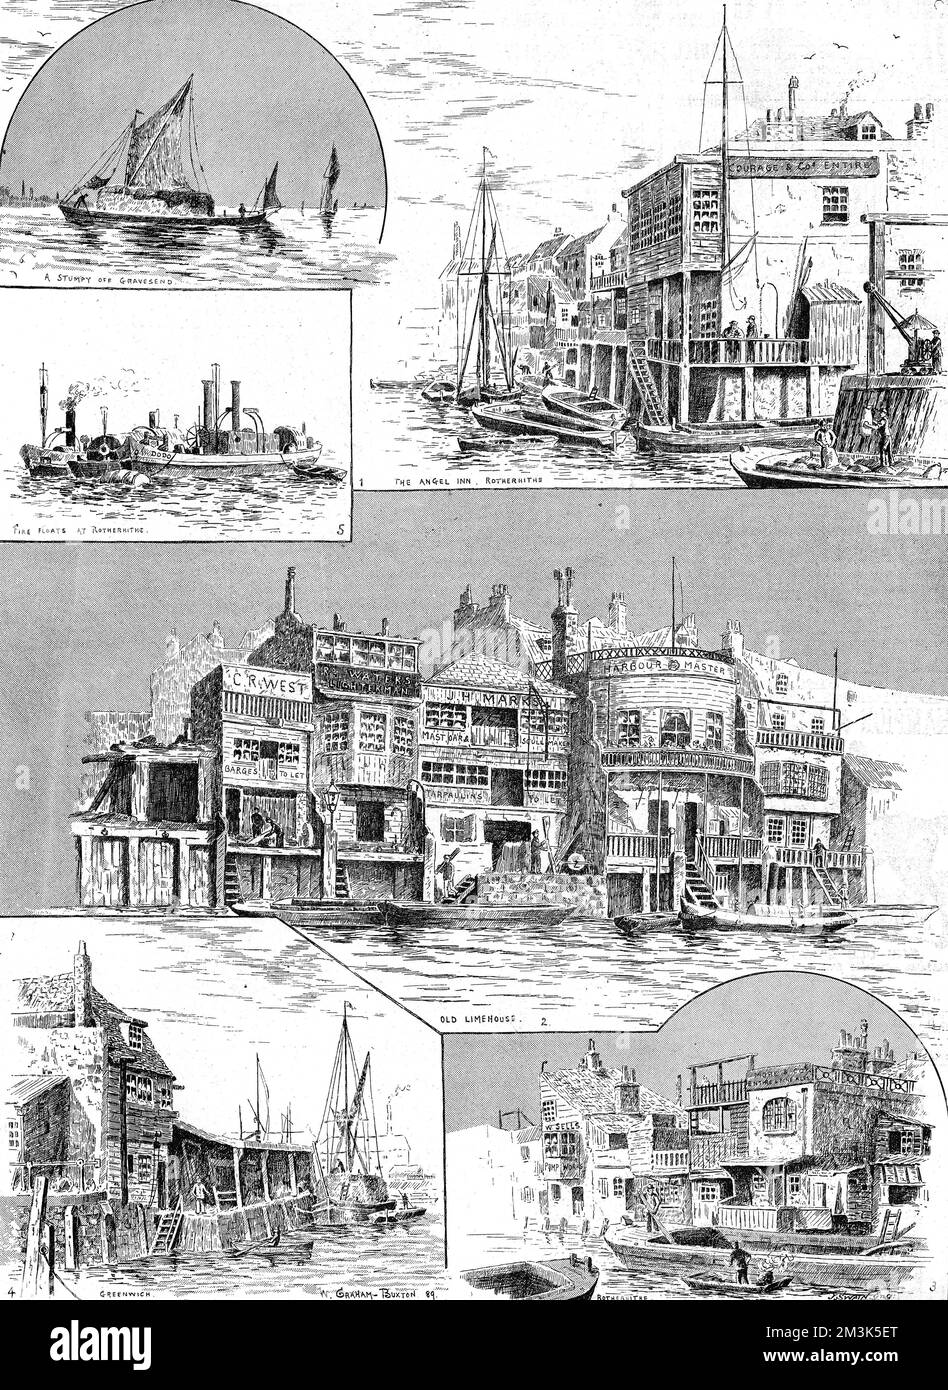 Engraving showing a number of scenes along the River Thames from Gravesend to Rotherhithe, London, 1890.    The images show (clockwise from top right): The Angel Inn, Rotherhithe; Old Limehouse; Rotherhithe; Greenwich; Fire Floats at Rotherhithe; a sailing barge off Gravesend.     Date: 3 May 1890 Stock Photo